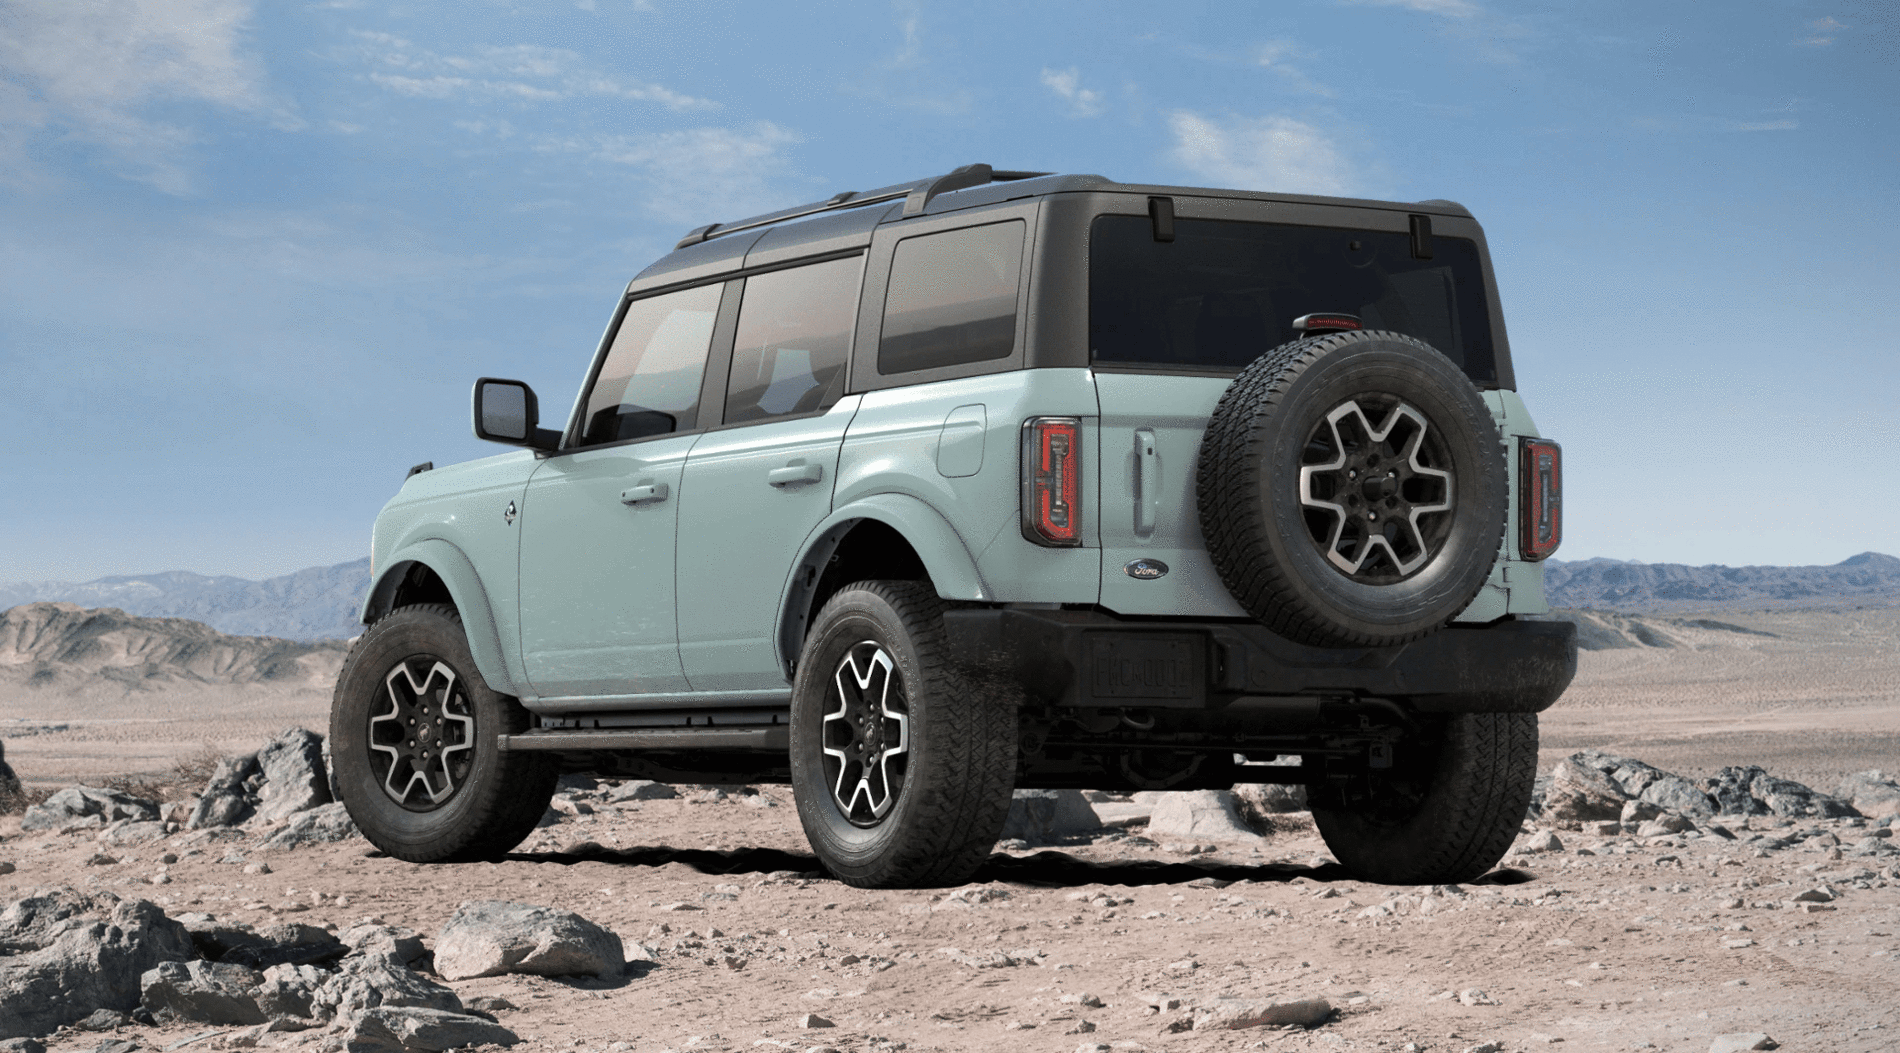 Ford Bronco Rendering: 2022 Boxwood Green and Cactus Gray OBX with 33s + white tops + shadow black tops Bronco rear facelift